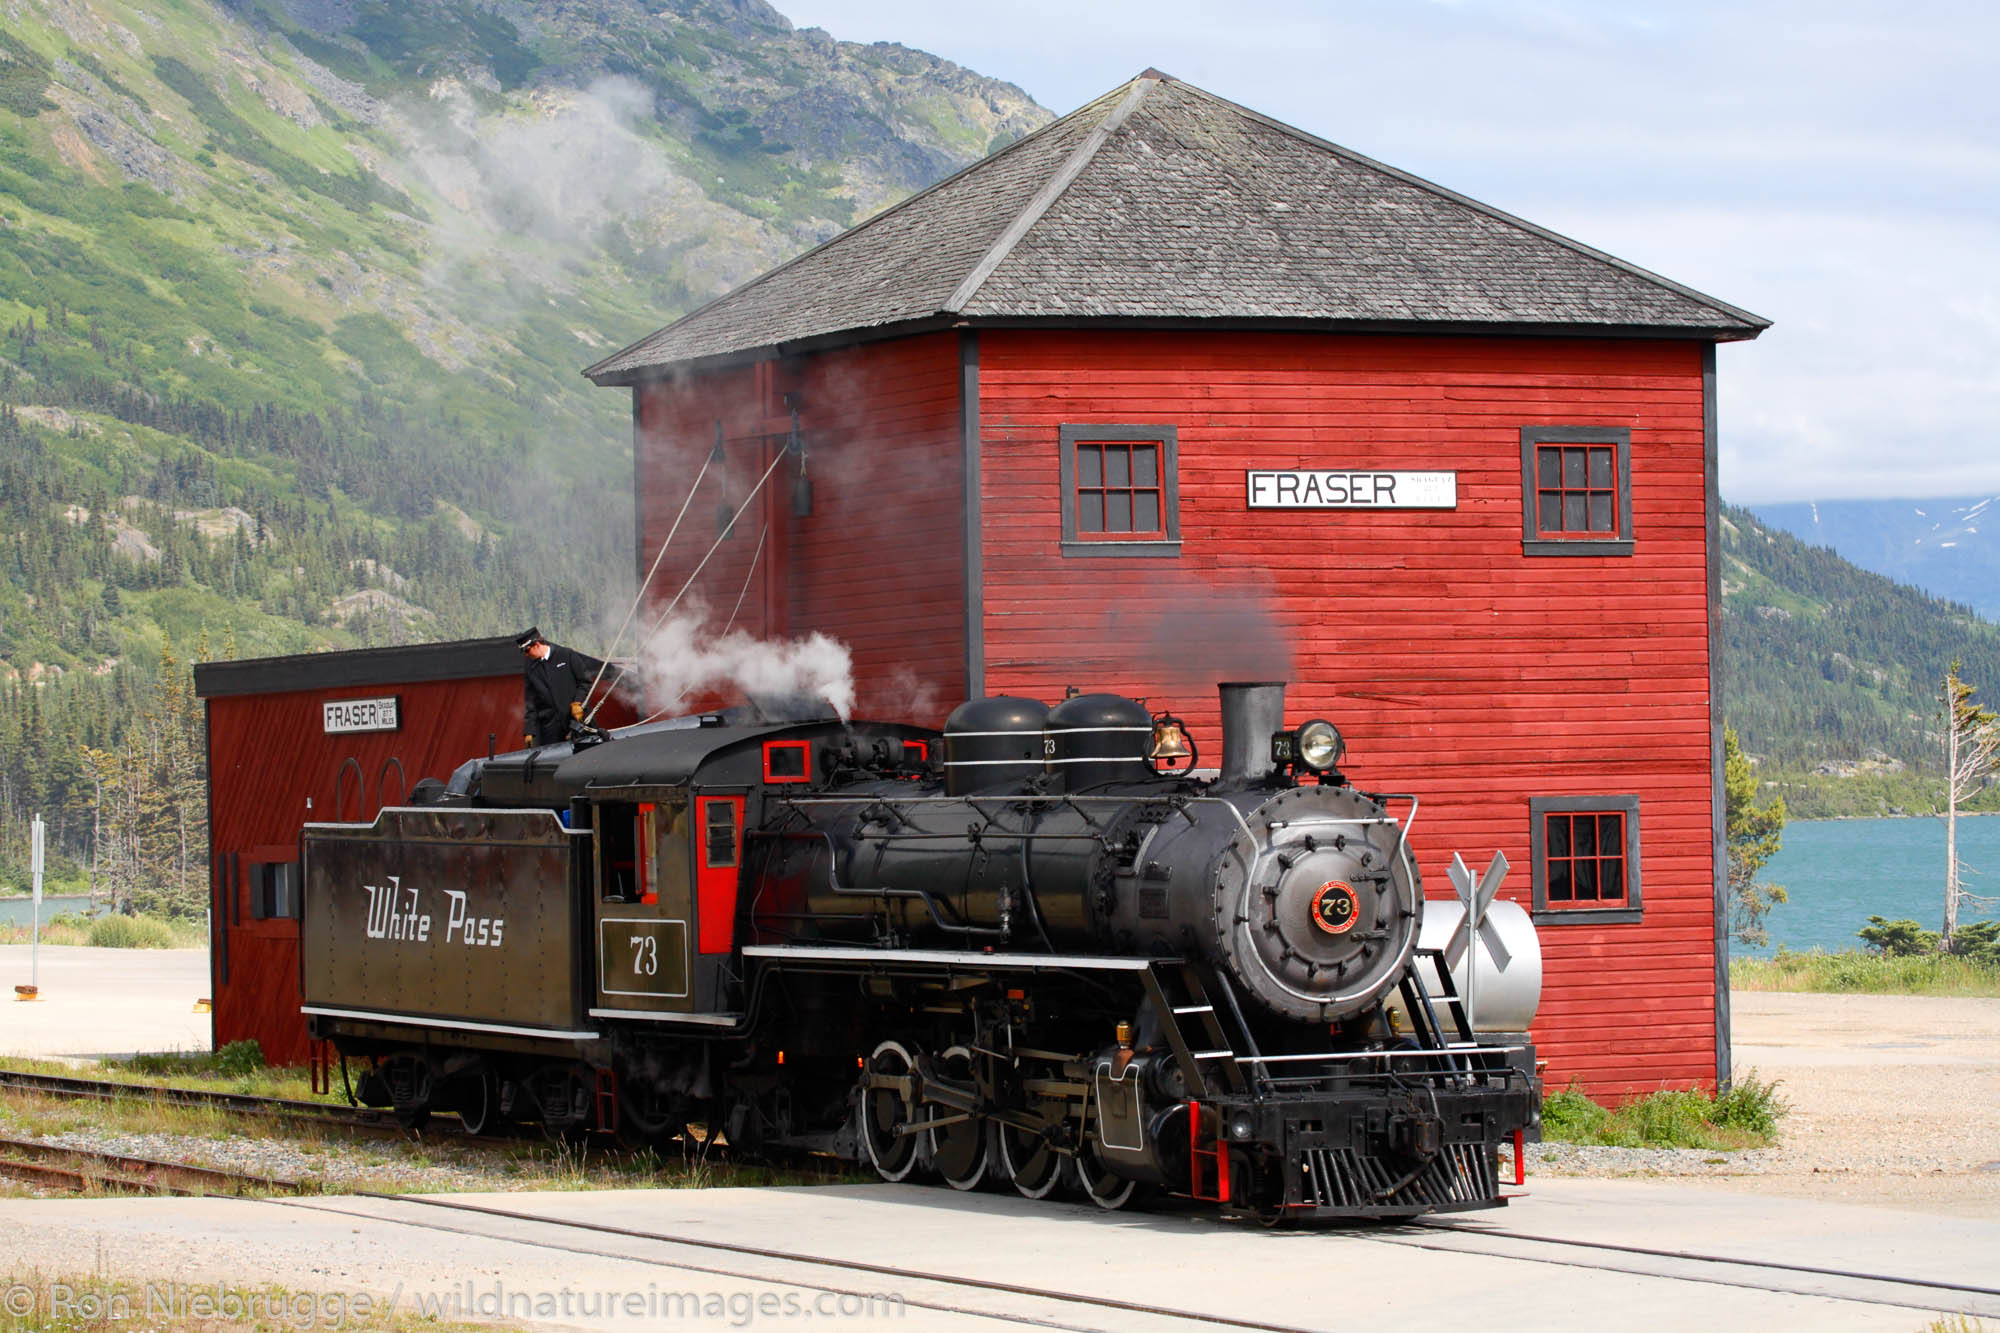 The historic steam engine number 73 gets water in Fraser, British Columbia Canada as part of the White Pass and Yukon Route railroad...